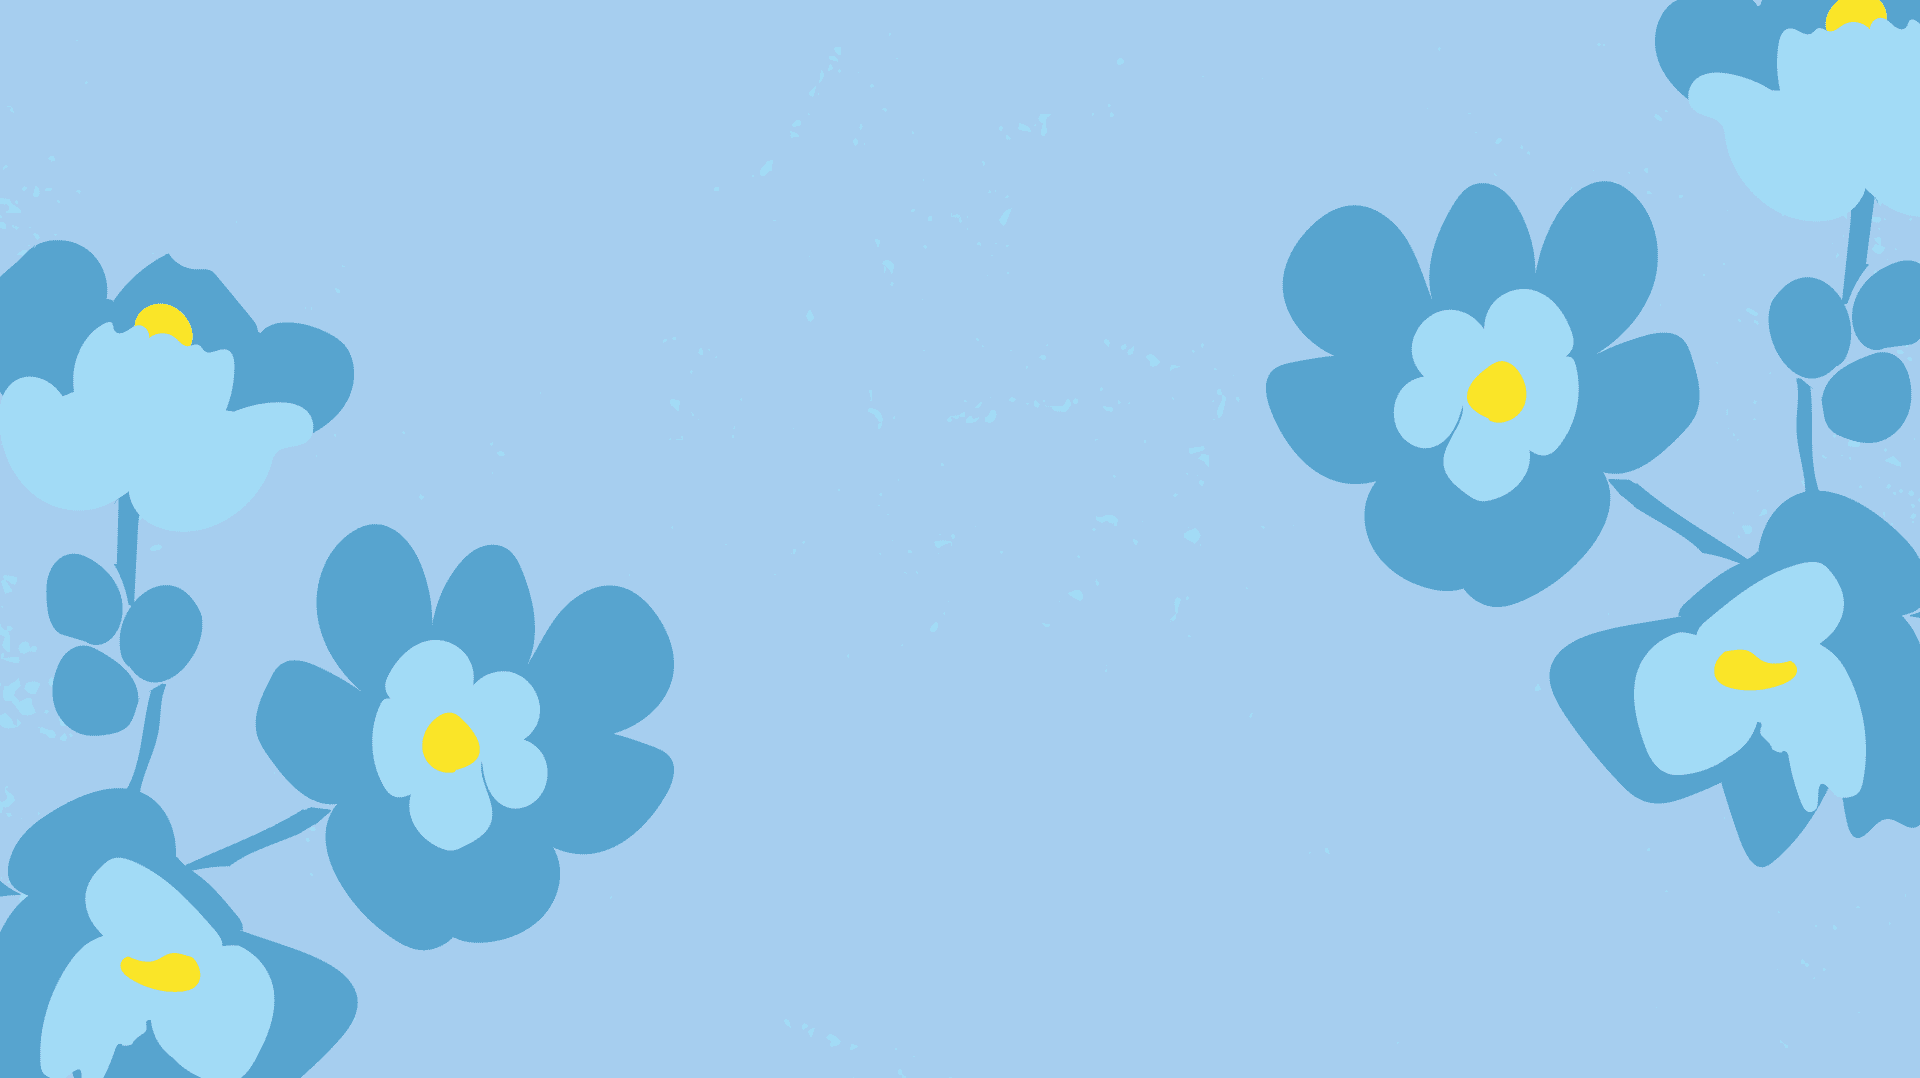 graphic representation of Oregon grape flowers in blue shades and yellow on a light blue background